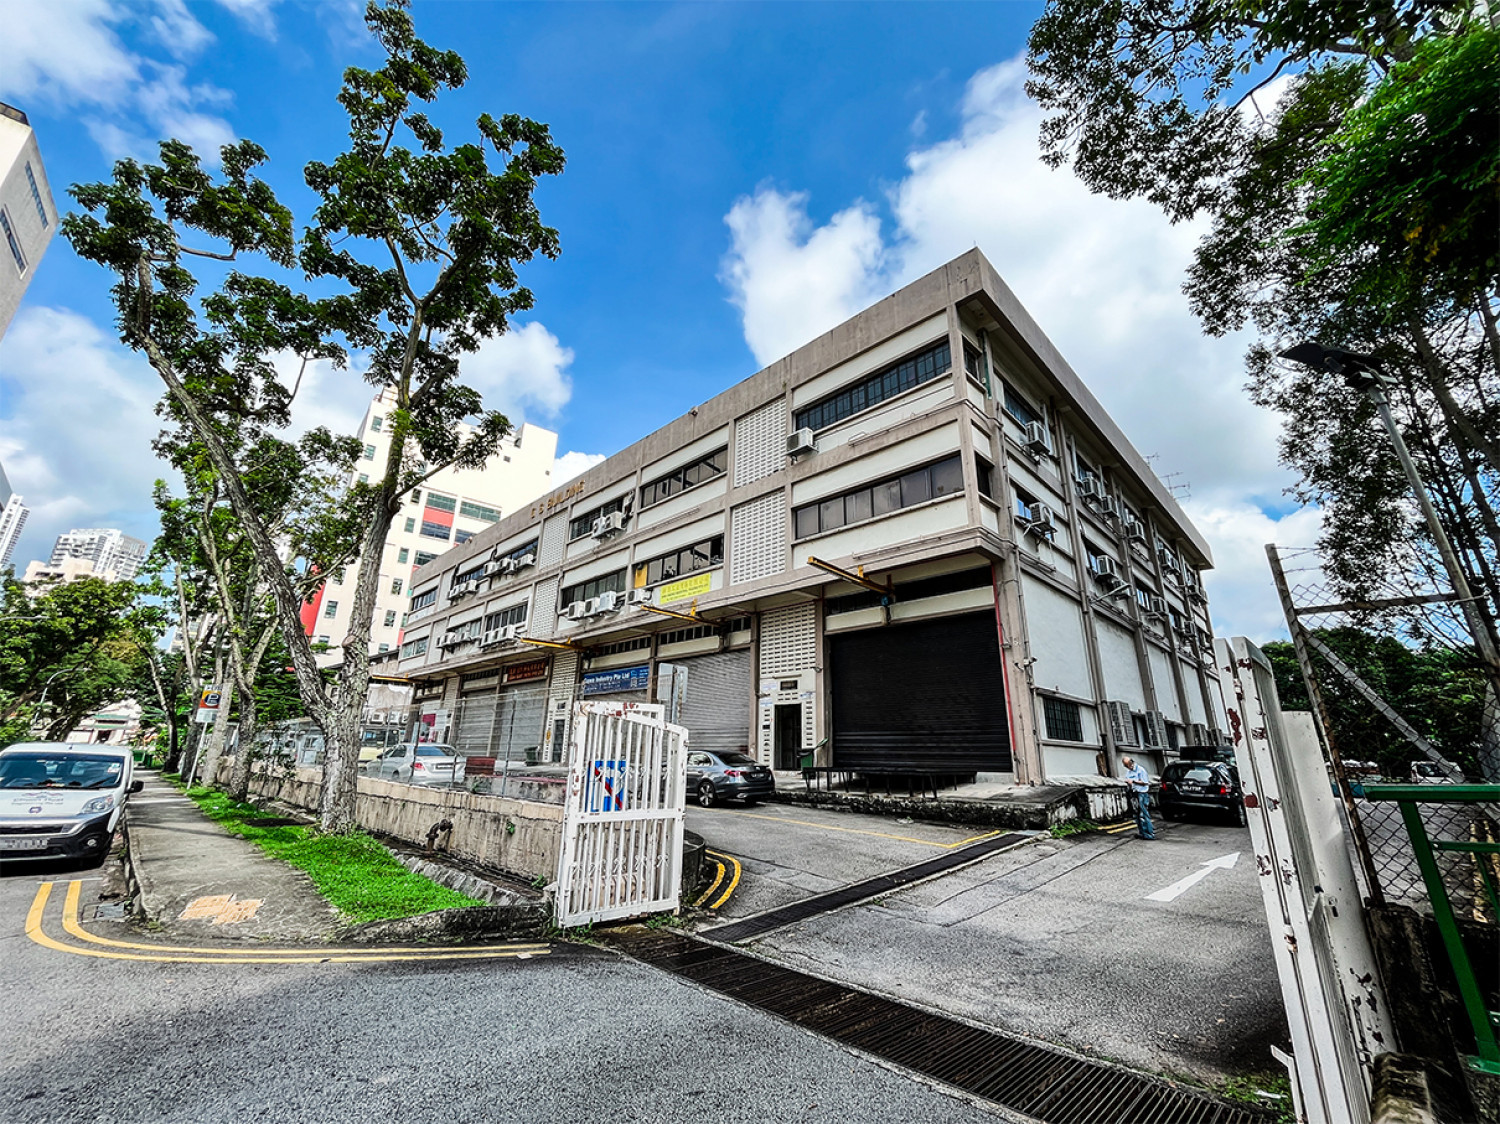 Industrial building at Lorong Ampas for sale at $65 mil - Property News